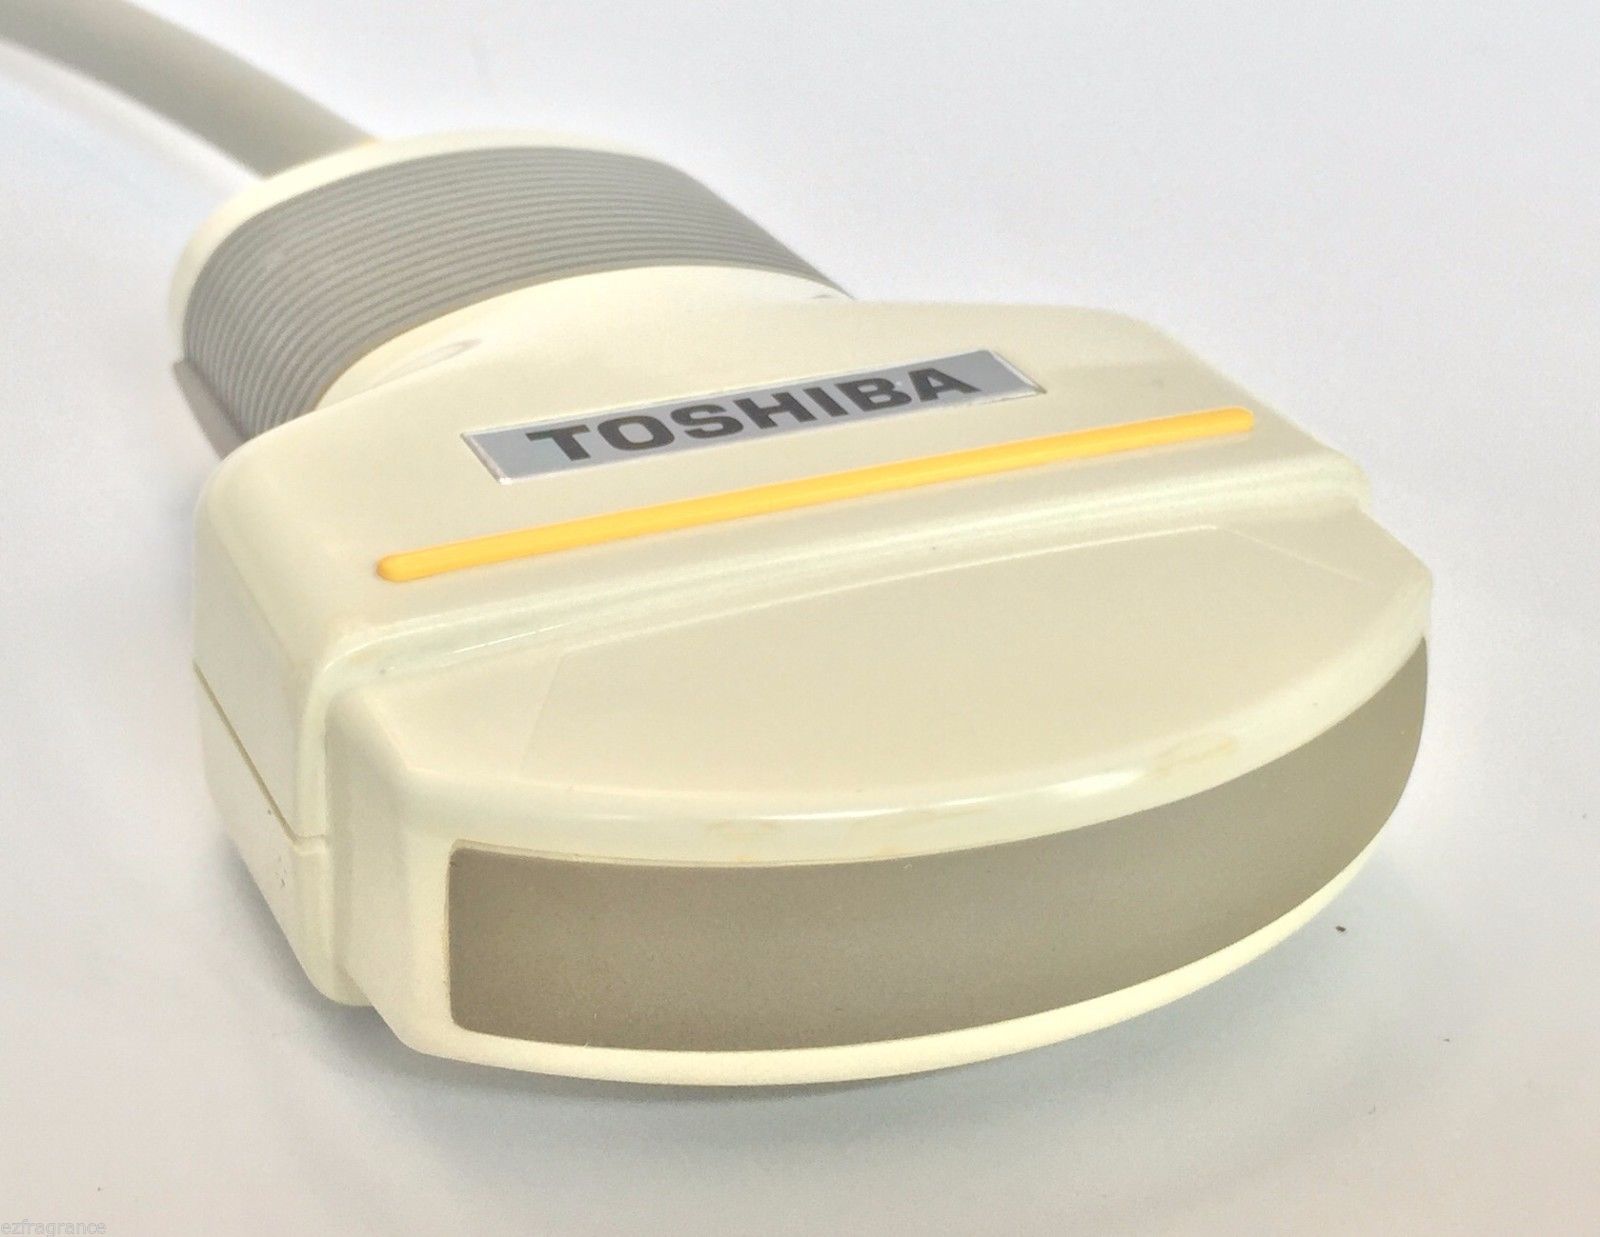 Toshiba PVF-575MT Ultrasound Transducer Probe For Sale / Used DIAGNOSTIC ULTRASOUND MACHINES FOR SALE